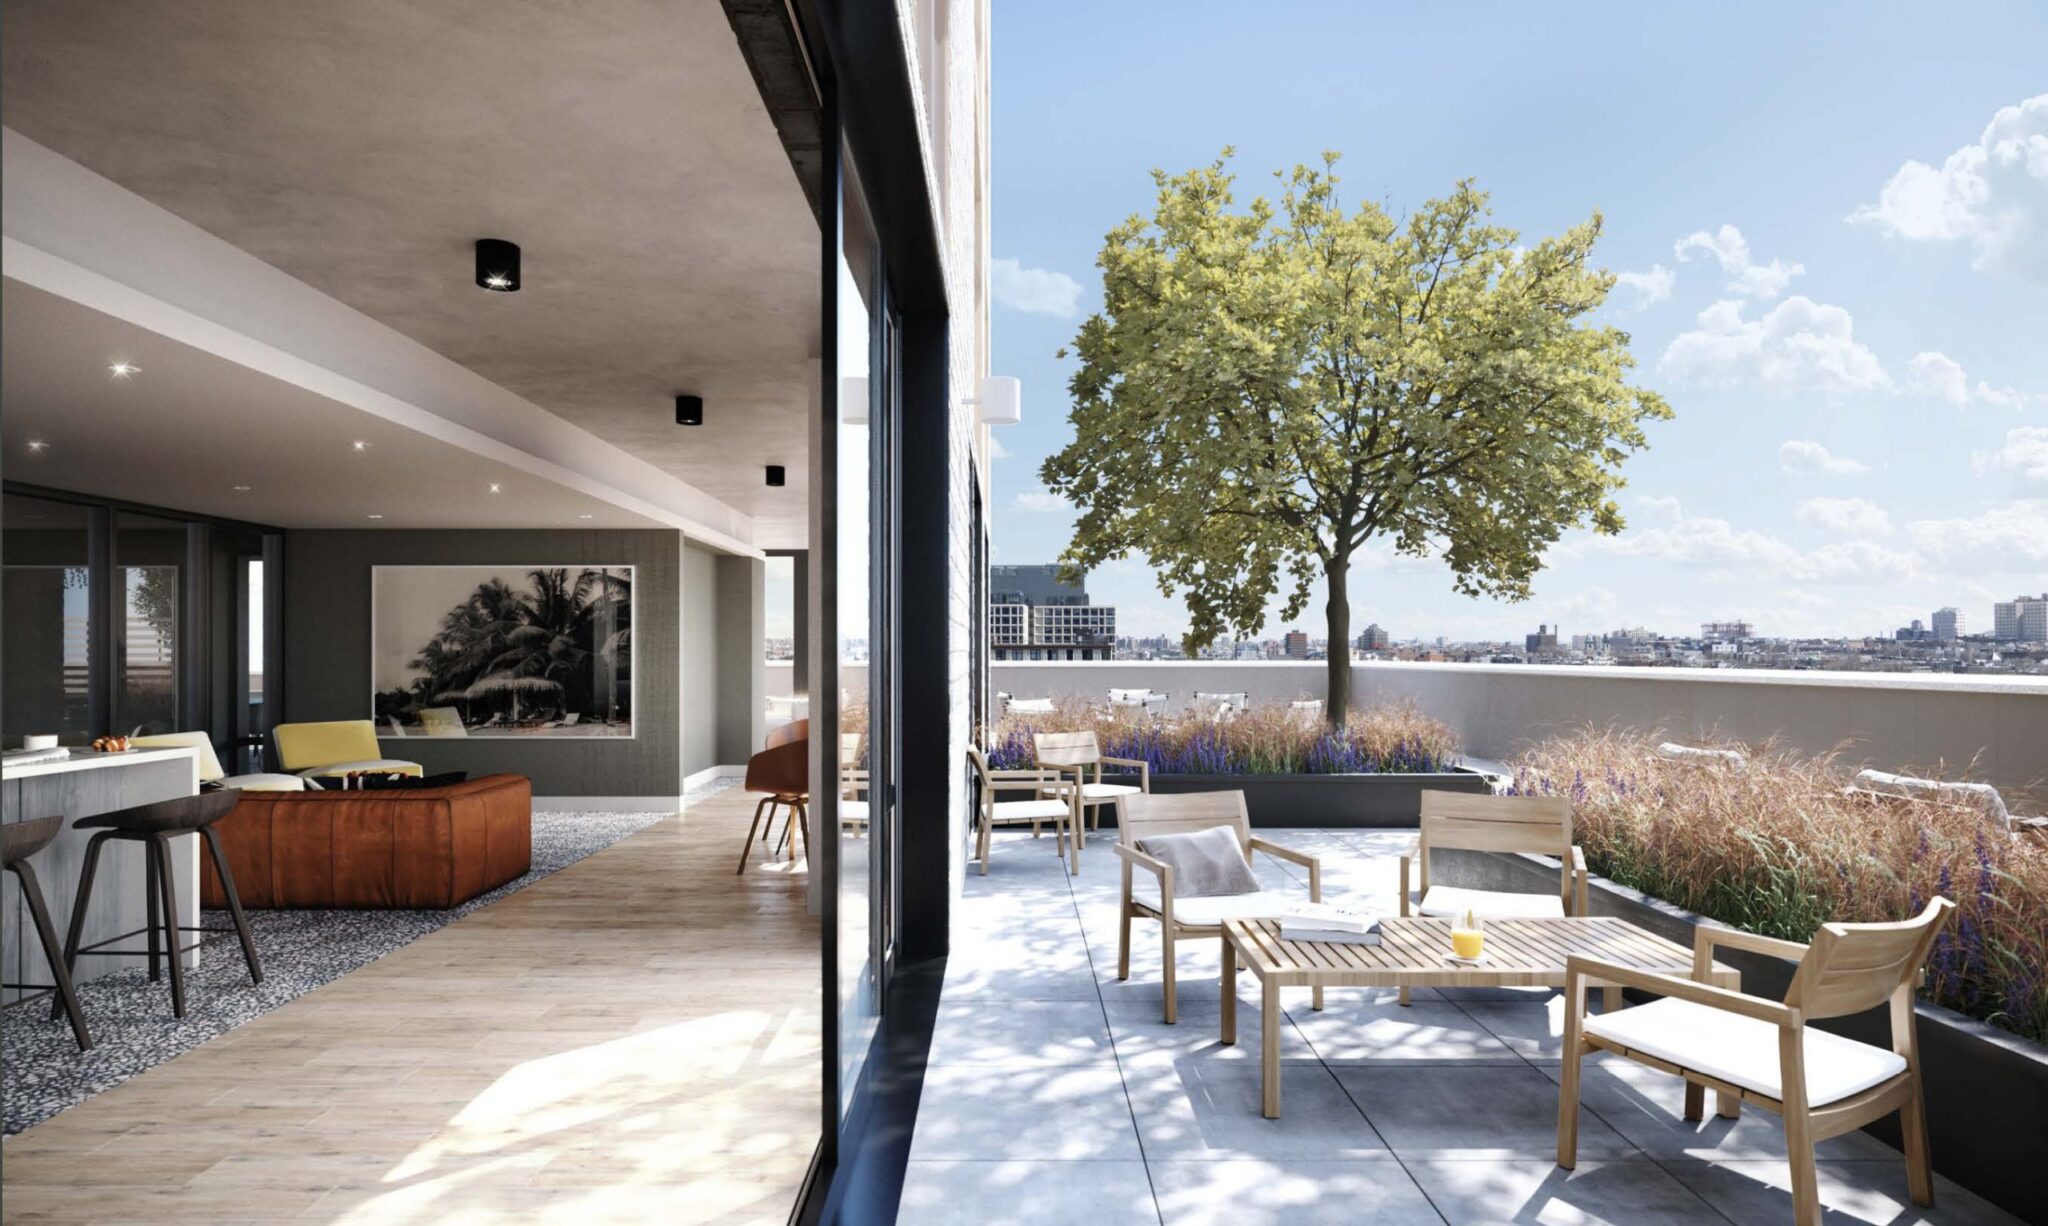 Vast indoor/outdoor terrace with seating at Plank Road in Prospect Heights